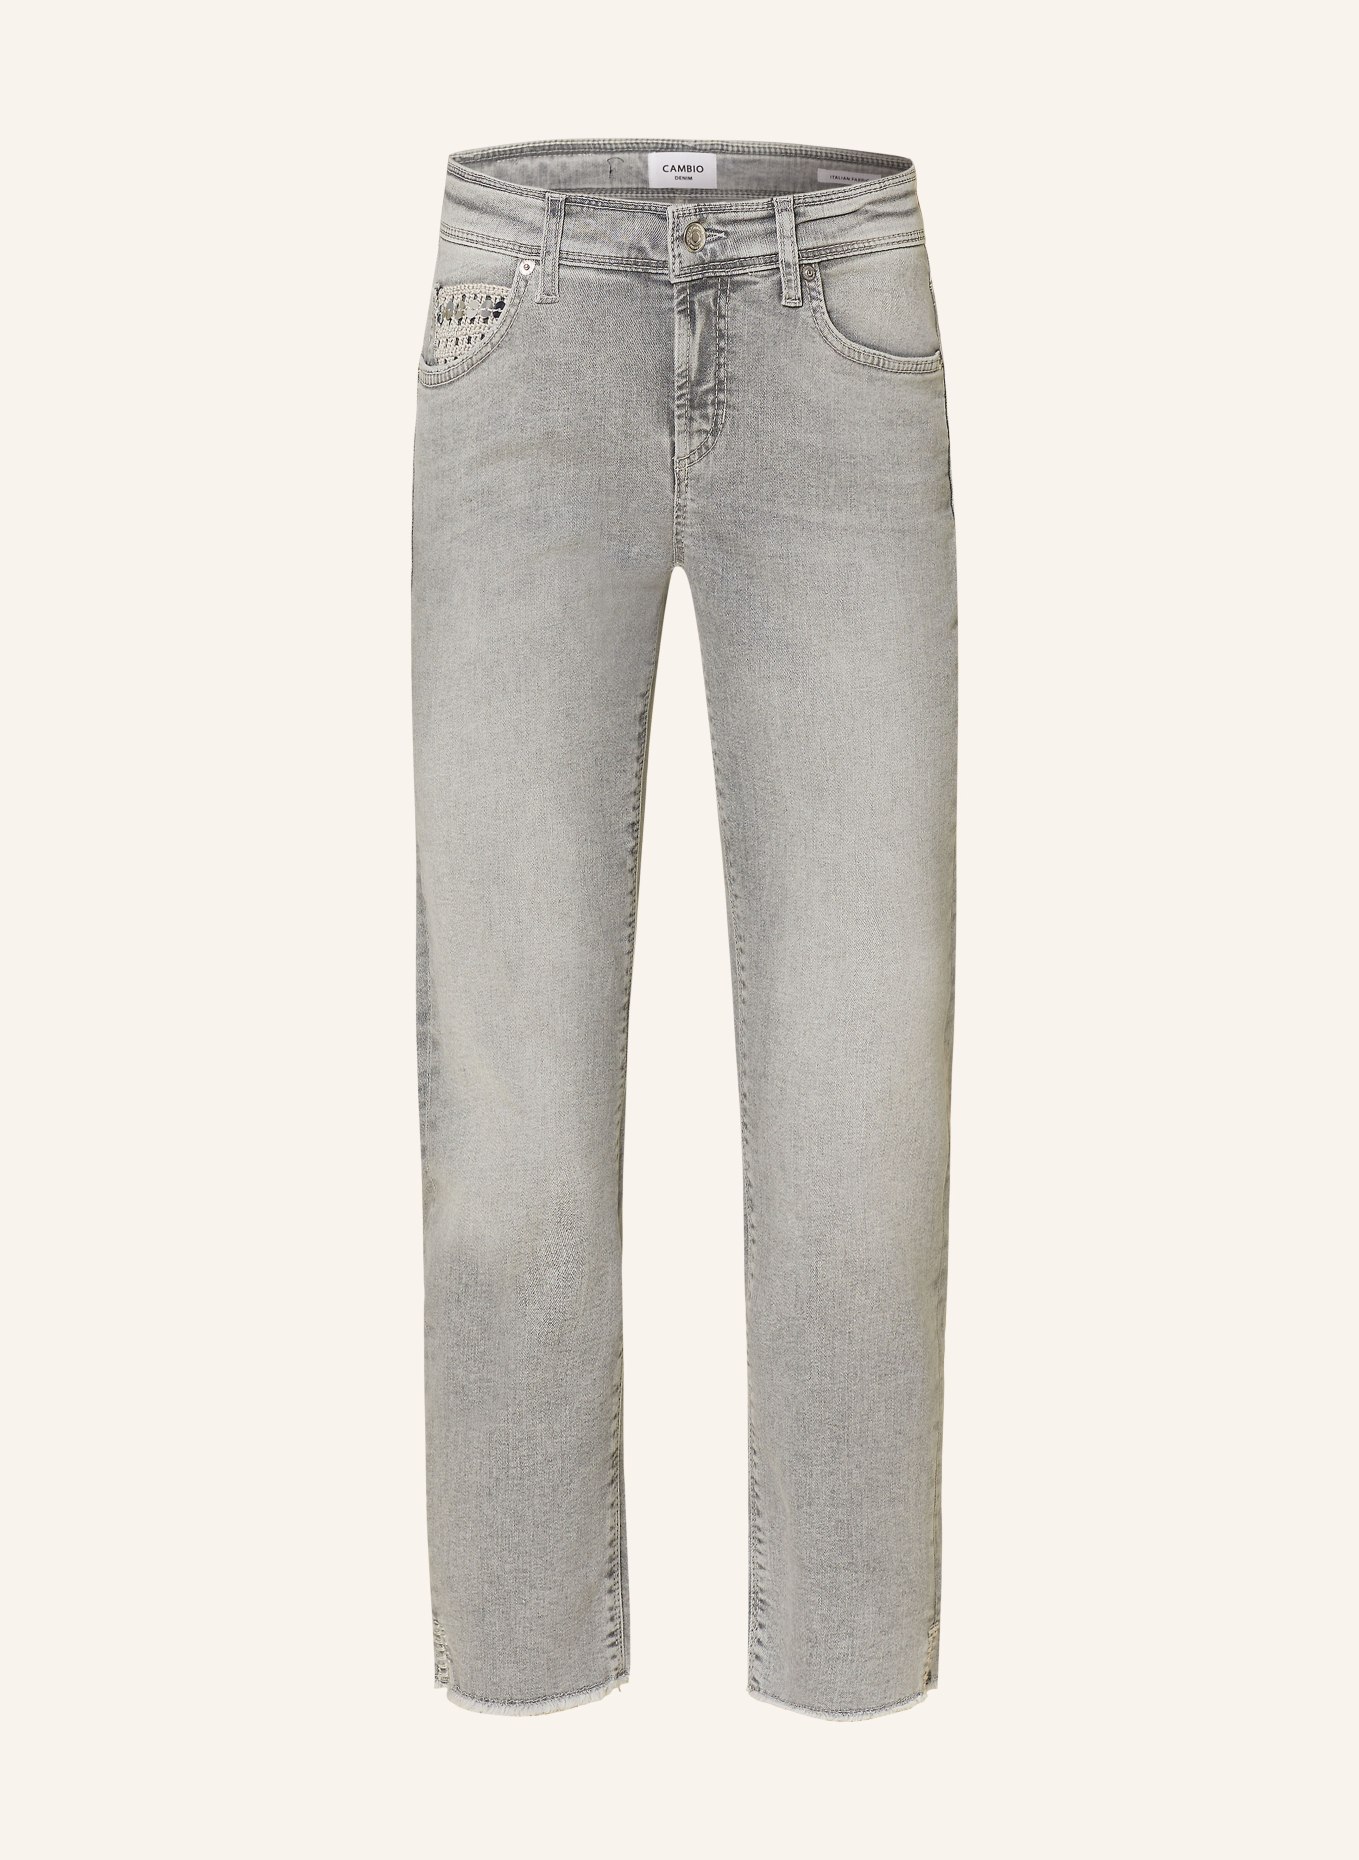 CAMBIO 7/8 jeans PIPER, Color: 5146 light grey fringed hem (Image 1)